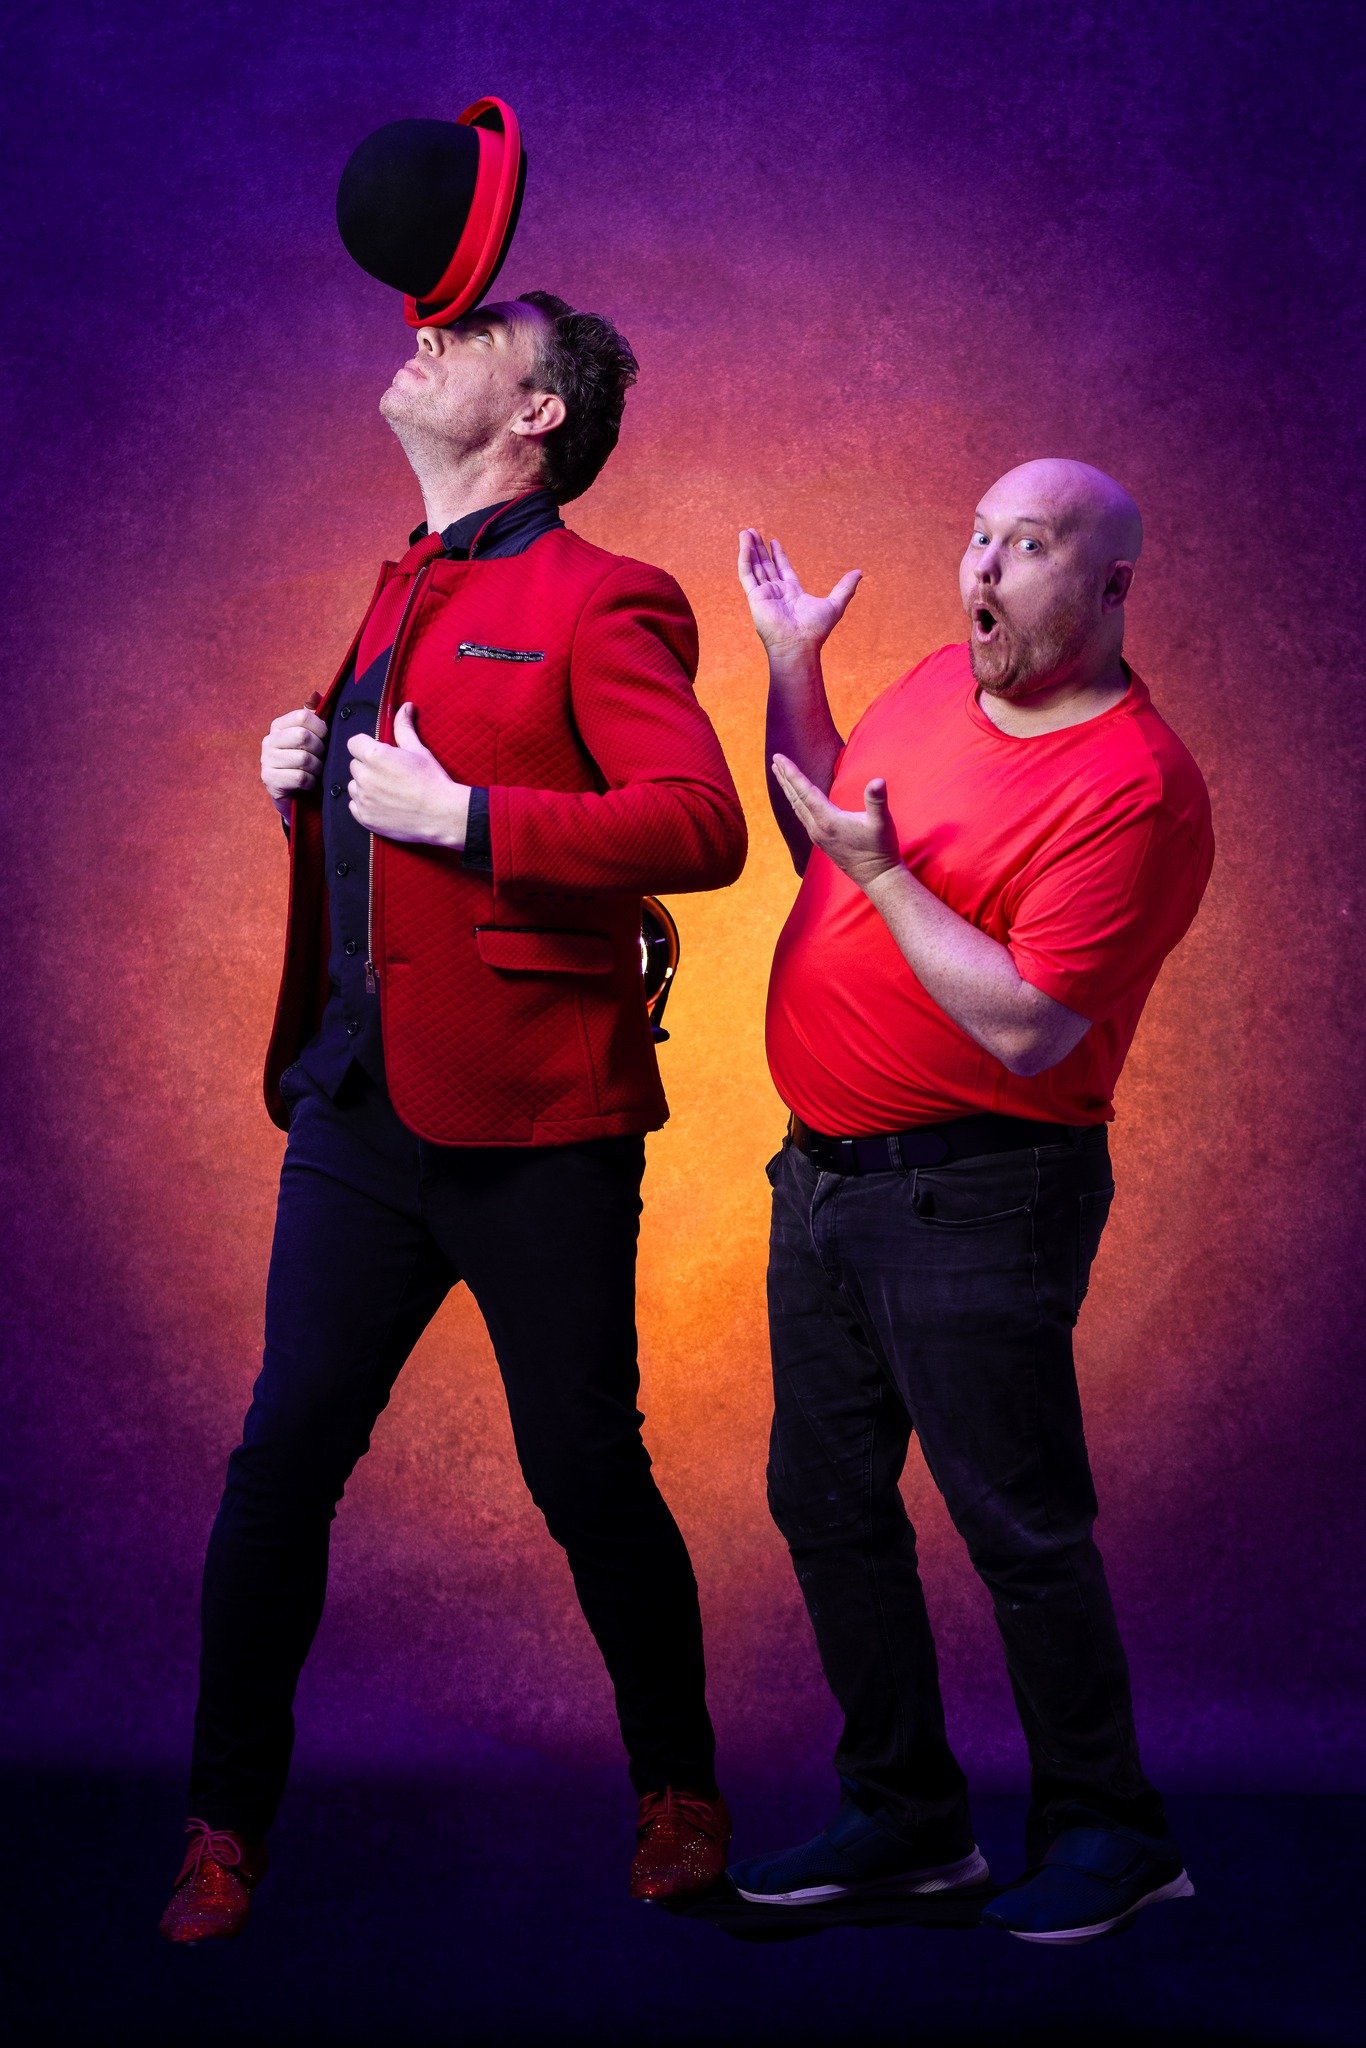 🪄🪄🪄 MAGICAL PRICES for Flabbergasters! 🪄🪄🪄

We're a week away from our two magic circus stunt shows as part of the @briscomedyfest!

We want to remind you that you can get great group prices for Flabbergasters - but you must call the box office